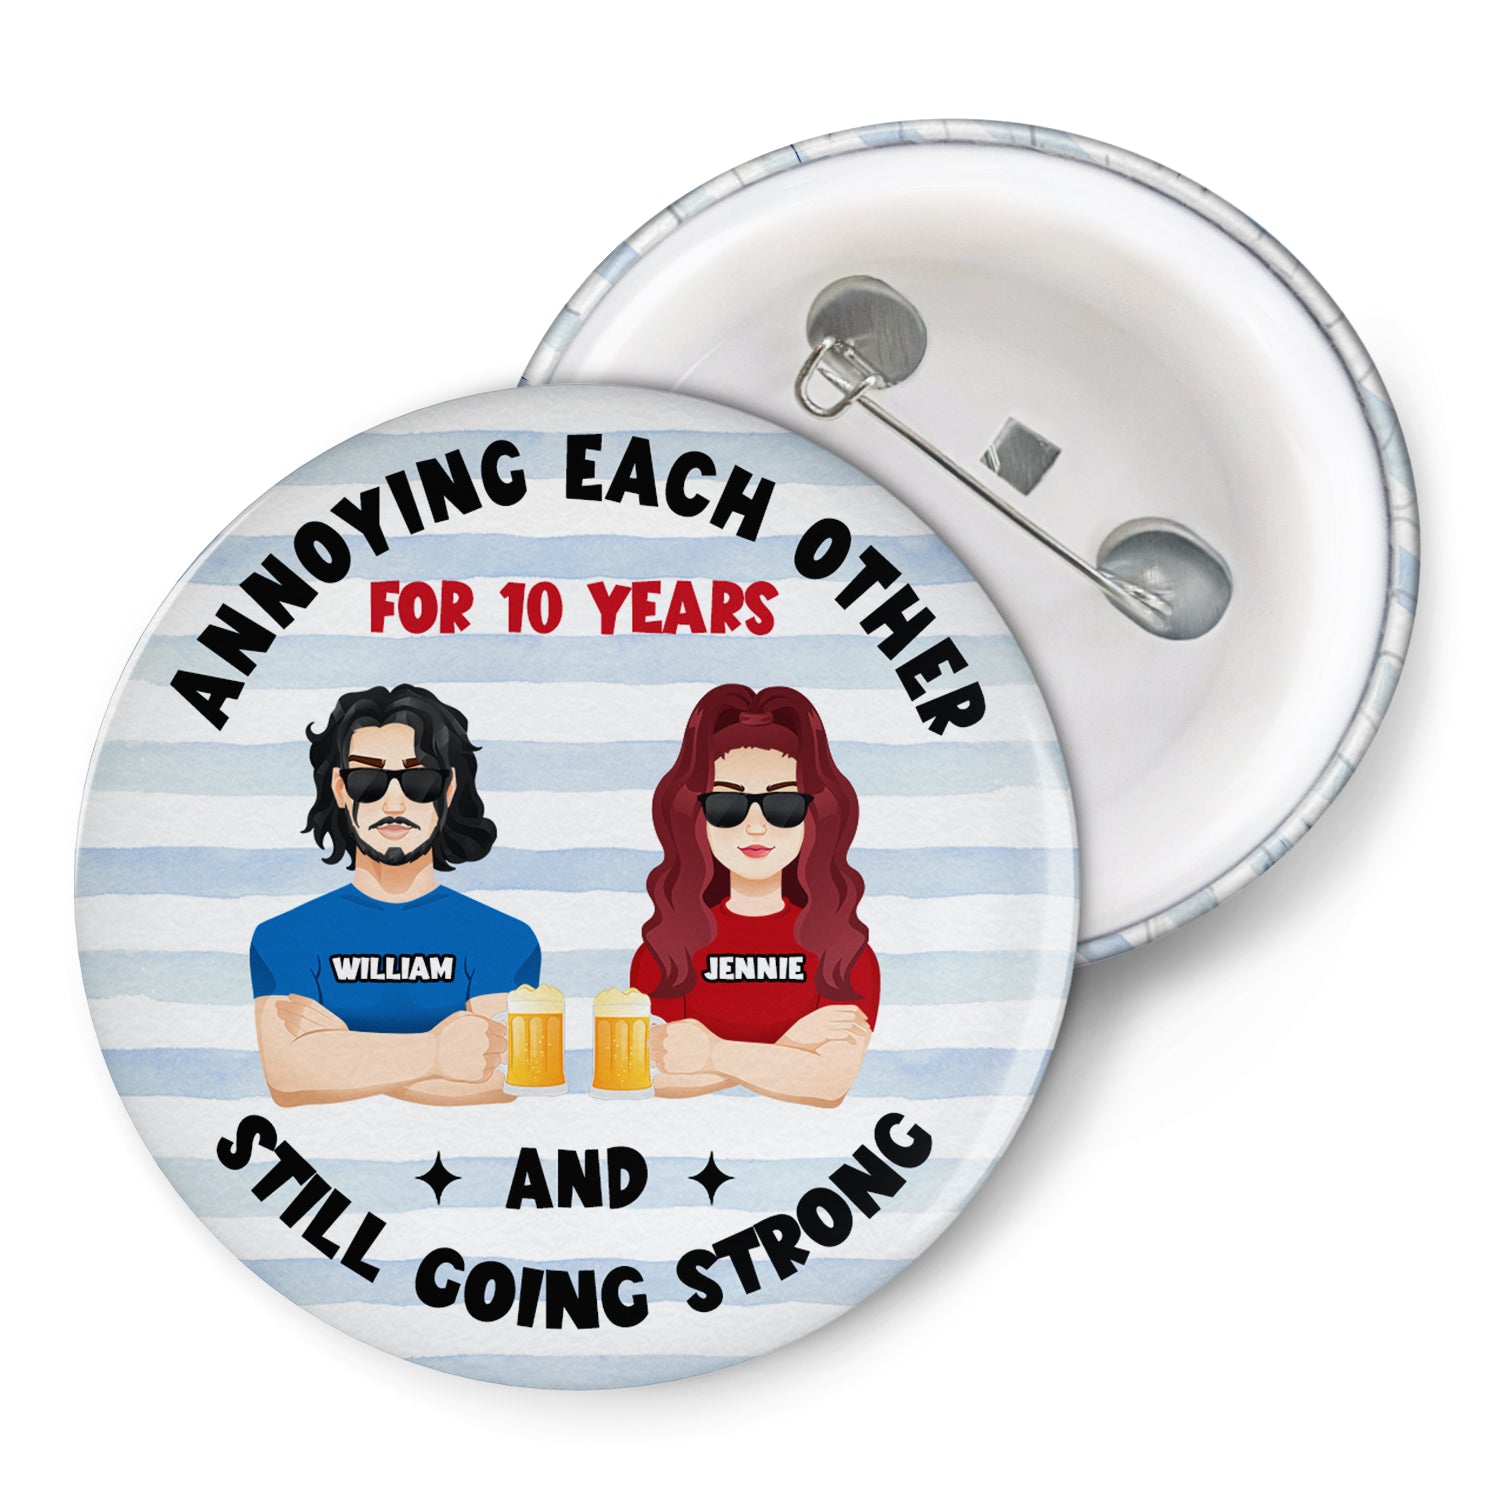 Annoying Each Other - Gift For Couples - Personalized Custom Plastic Pinback Button